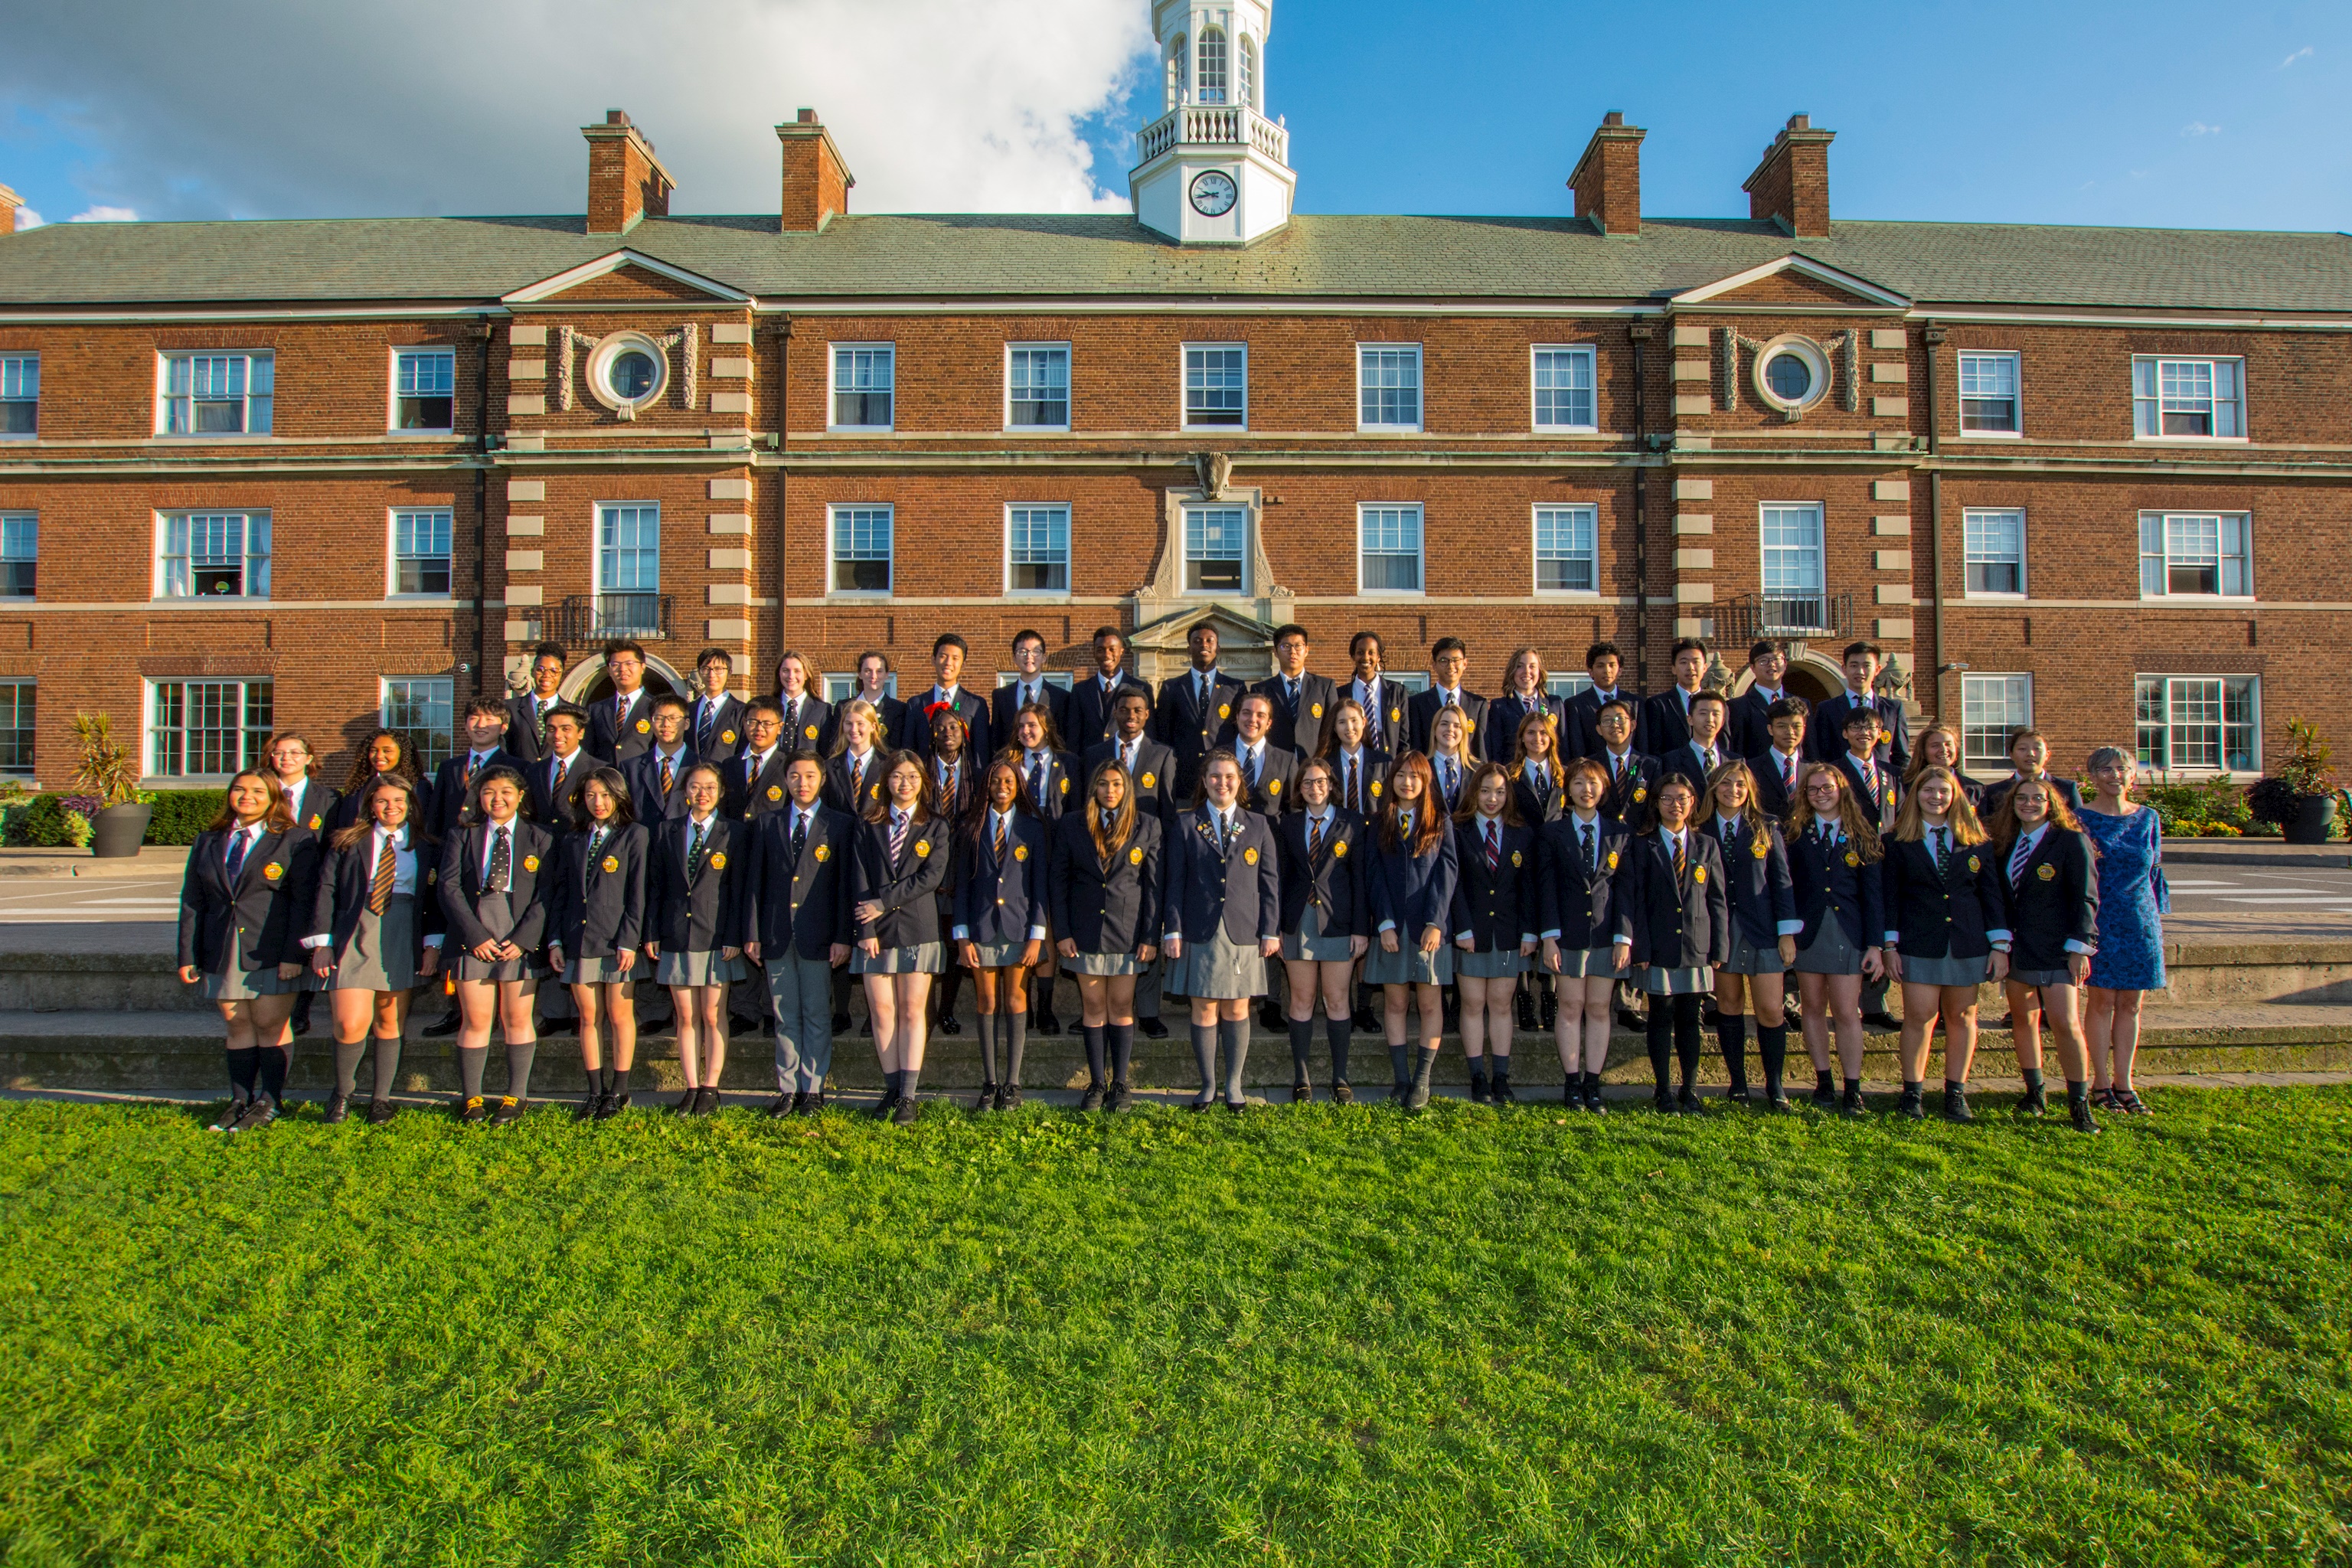 class photo of the upper school outide the main school building